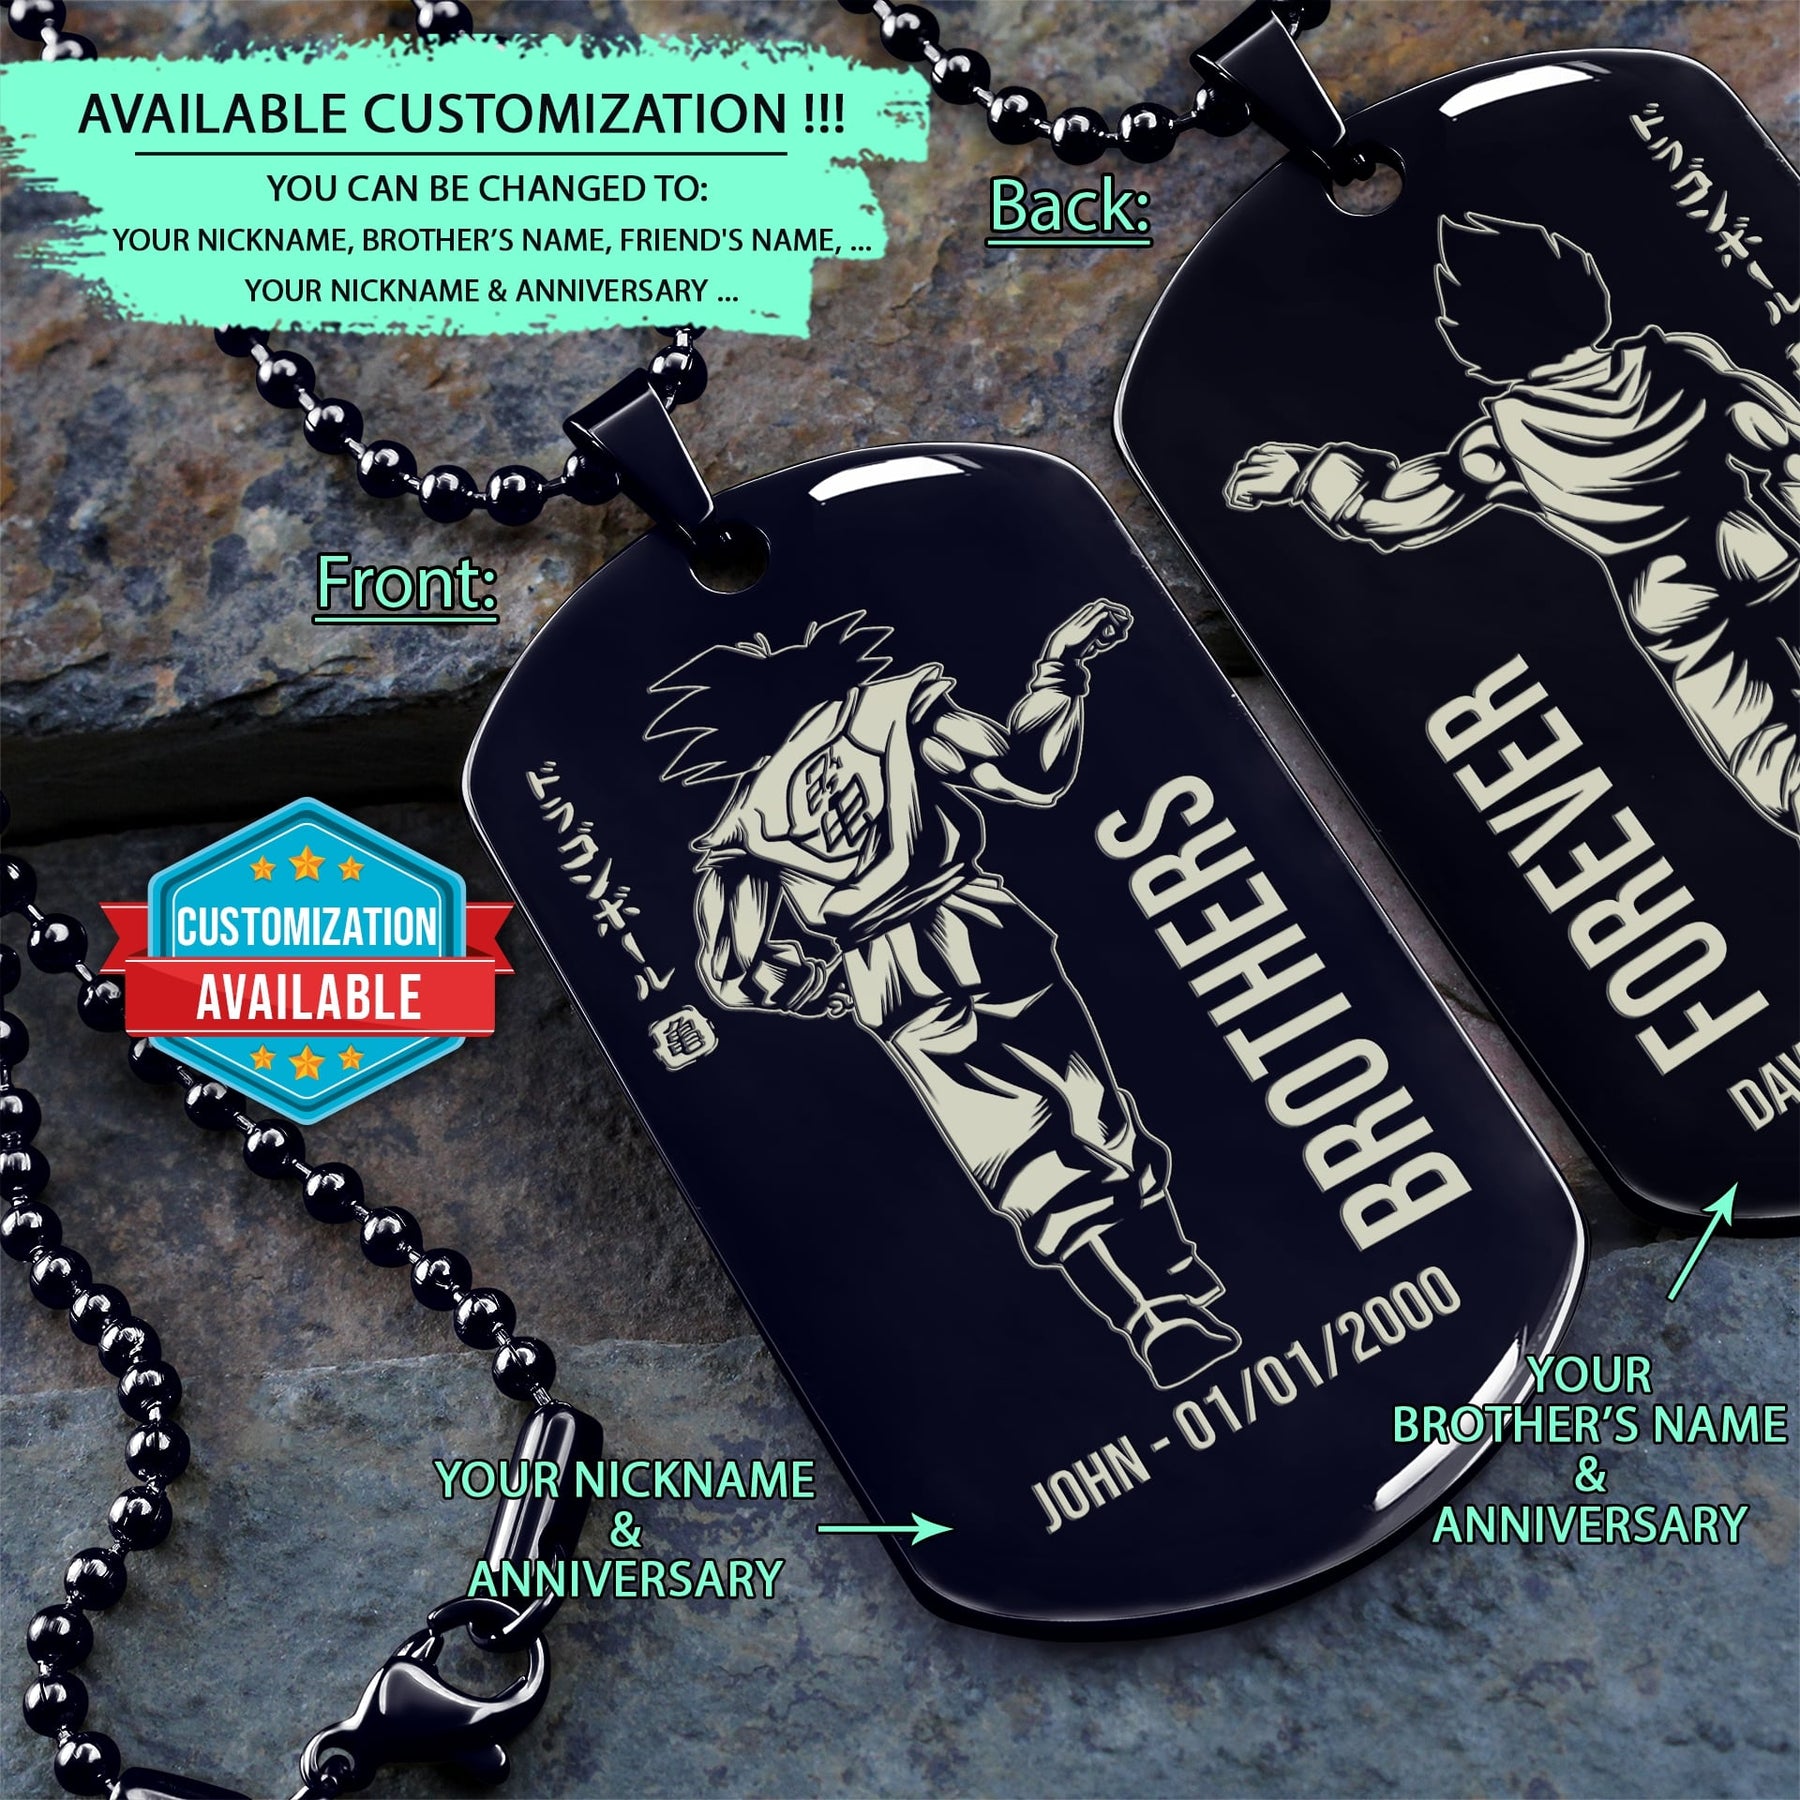 DRD040 + DRD041 - Brothers Forever - Goku - Vegeta - Dragon Ball Dog Tag - Engraved Double-Sided Dog Tag